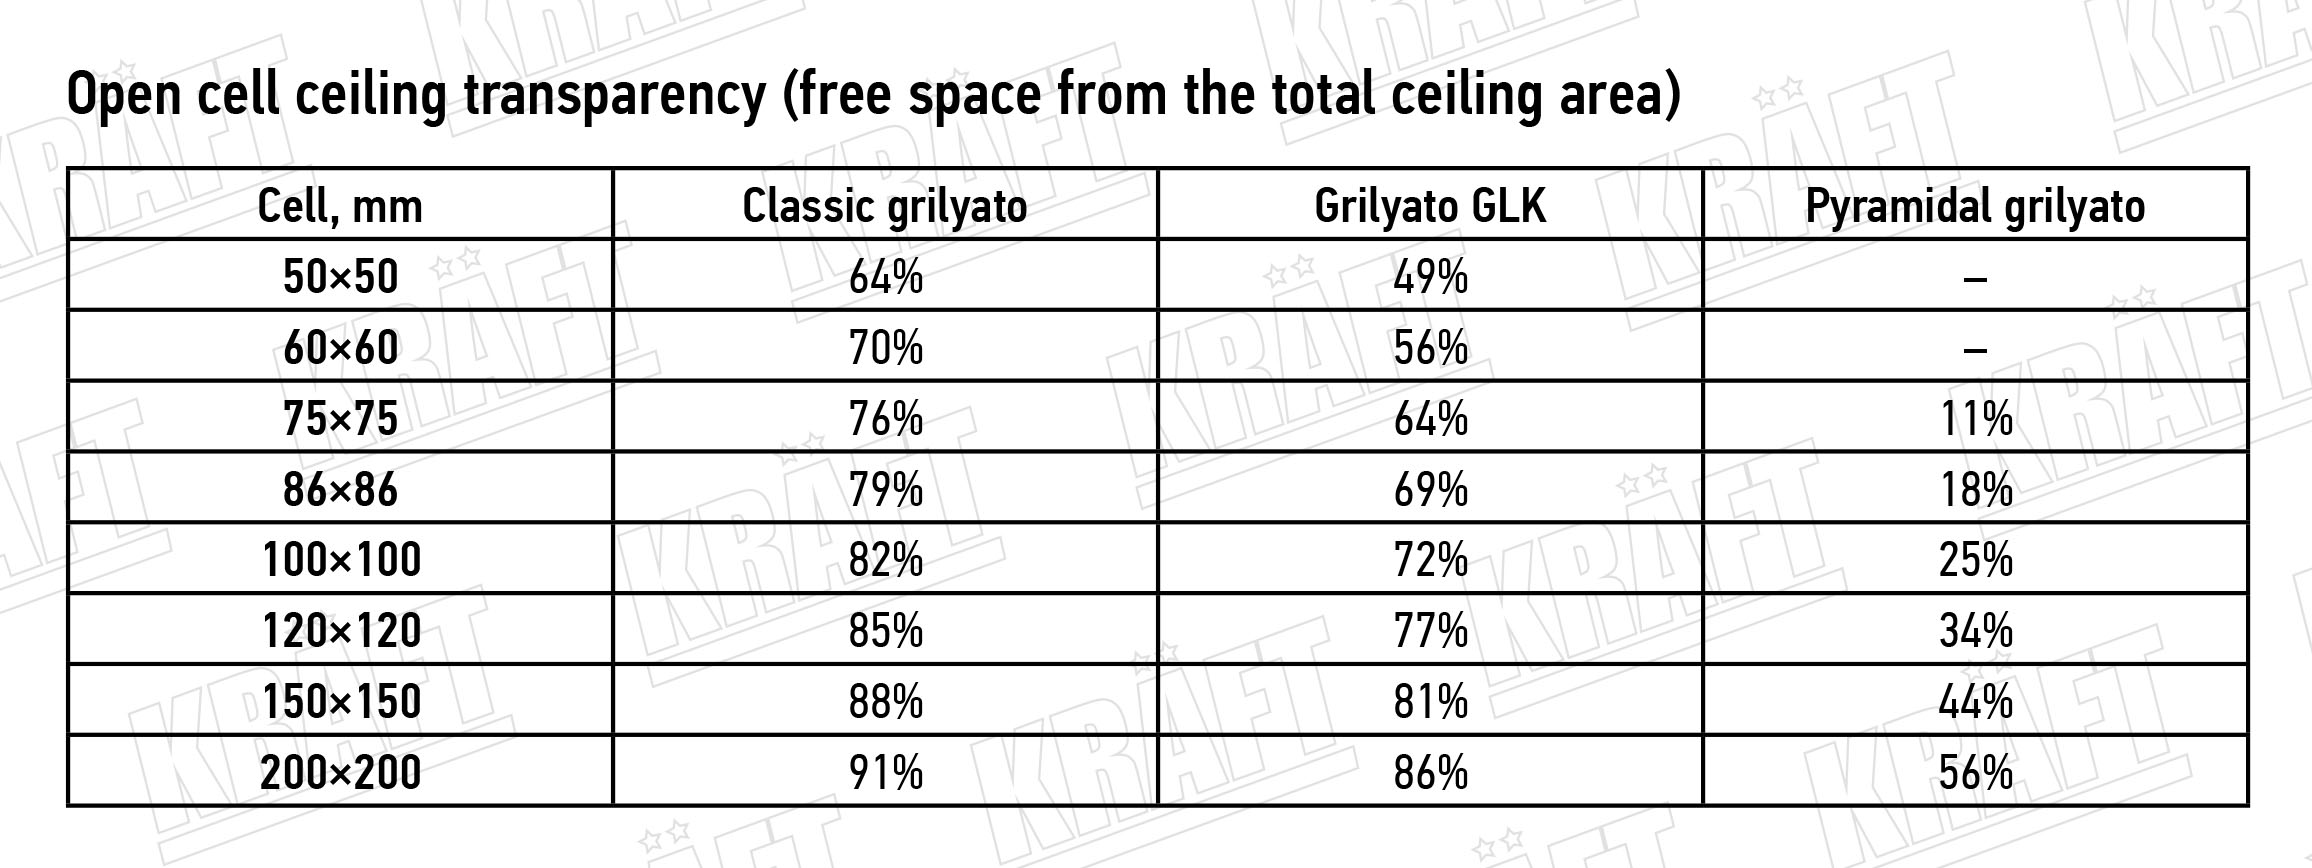 Comparative table of the transparency of different types of open cell ceilings depending on the size of the cell